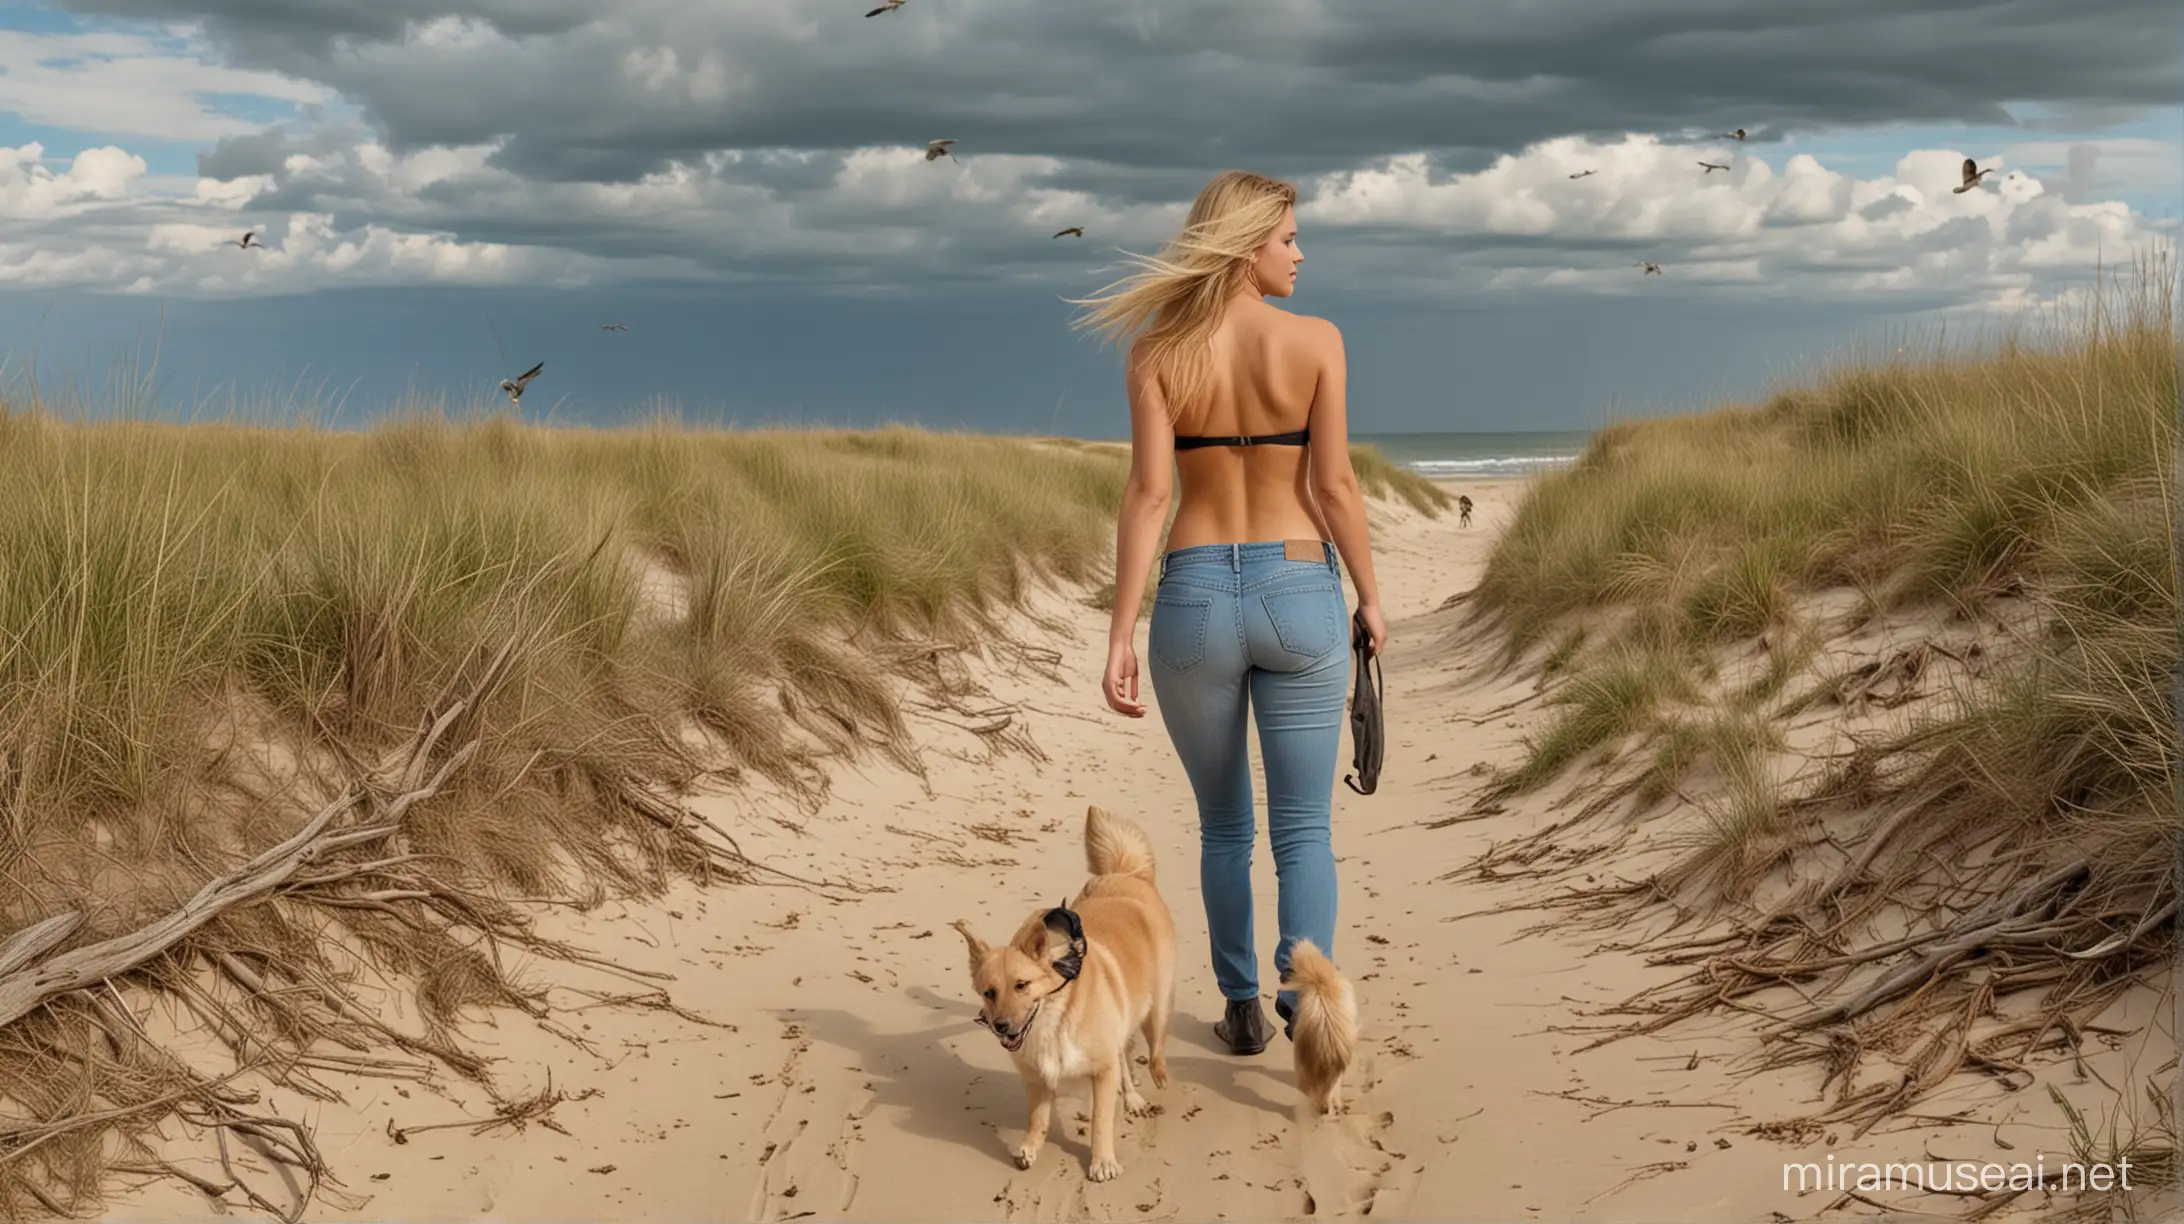 a gorgeous slender 18 year old European girl with 32DDD breasts, wearing blue jeans, topless, long blond hair, walking through a dune landscape with a view of the sea. Sunny atmosphere, dramatic  clouds, some seagulls flying, driftwood laying on the beach,  a big fierce German-shepherd dog is walking right next to her